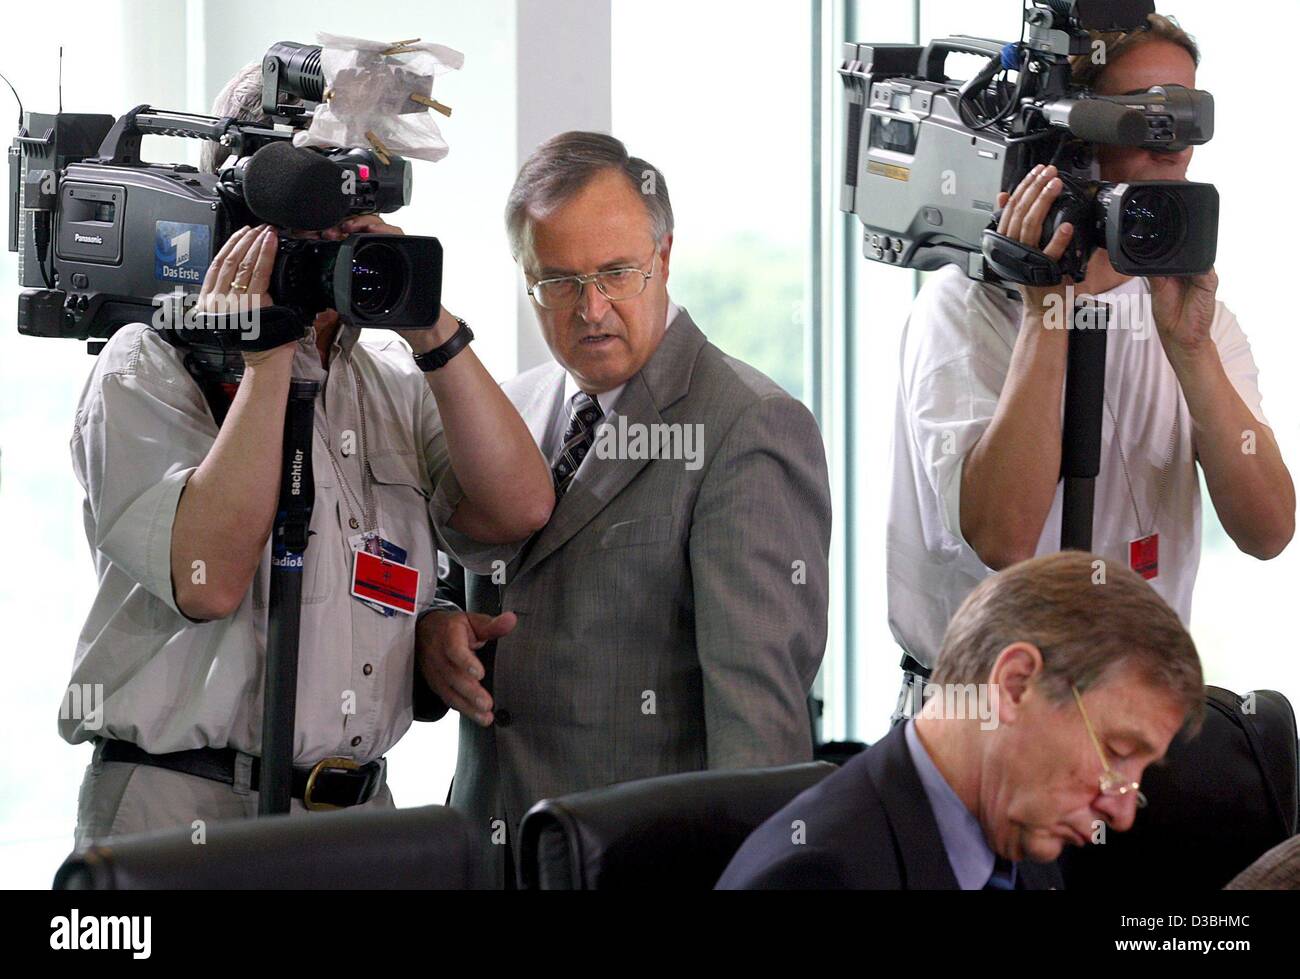 (dpa) - German Finance Minister Hans Eichel is making his way through cameramen to sit down at the cabinet table with Economy and Labour Minister Wolfgang Clement, Berlin, 4 June 2003. The cabinet spoke about implementing the reform plans 'Agenda 2010'. Later on, Eichel said the plans to cut spendin Stock Photo